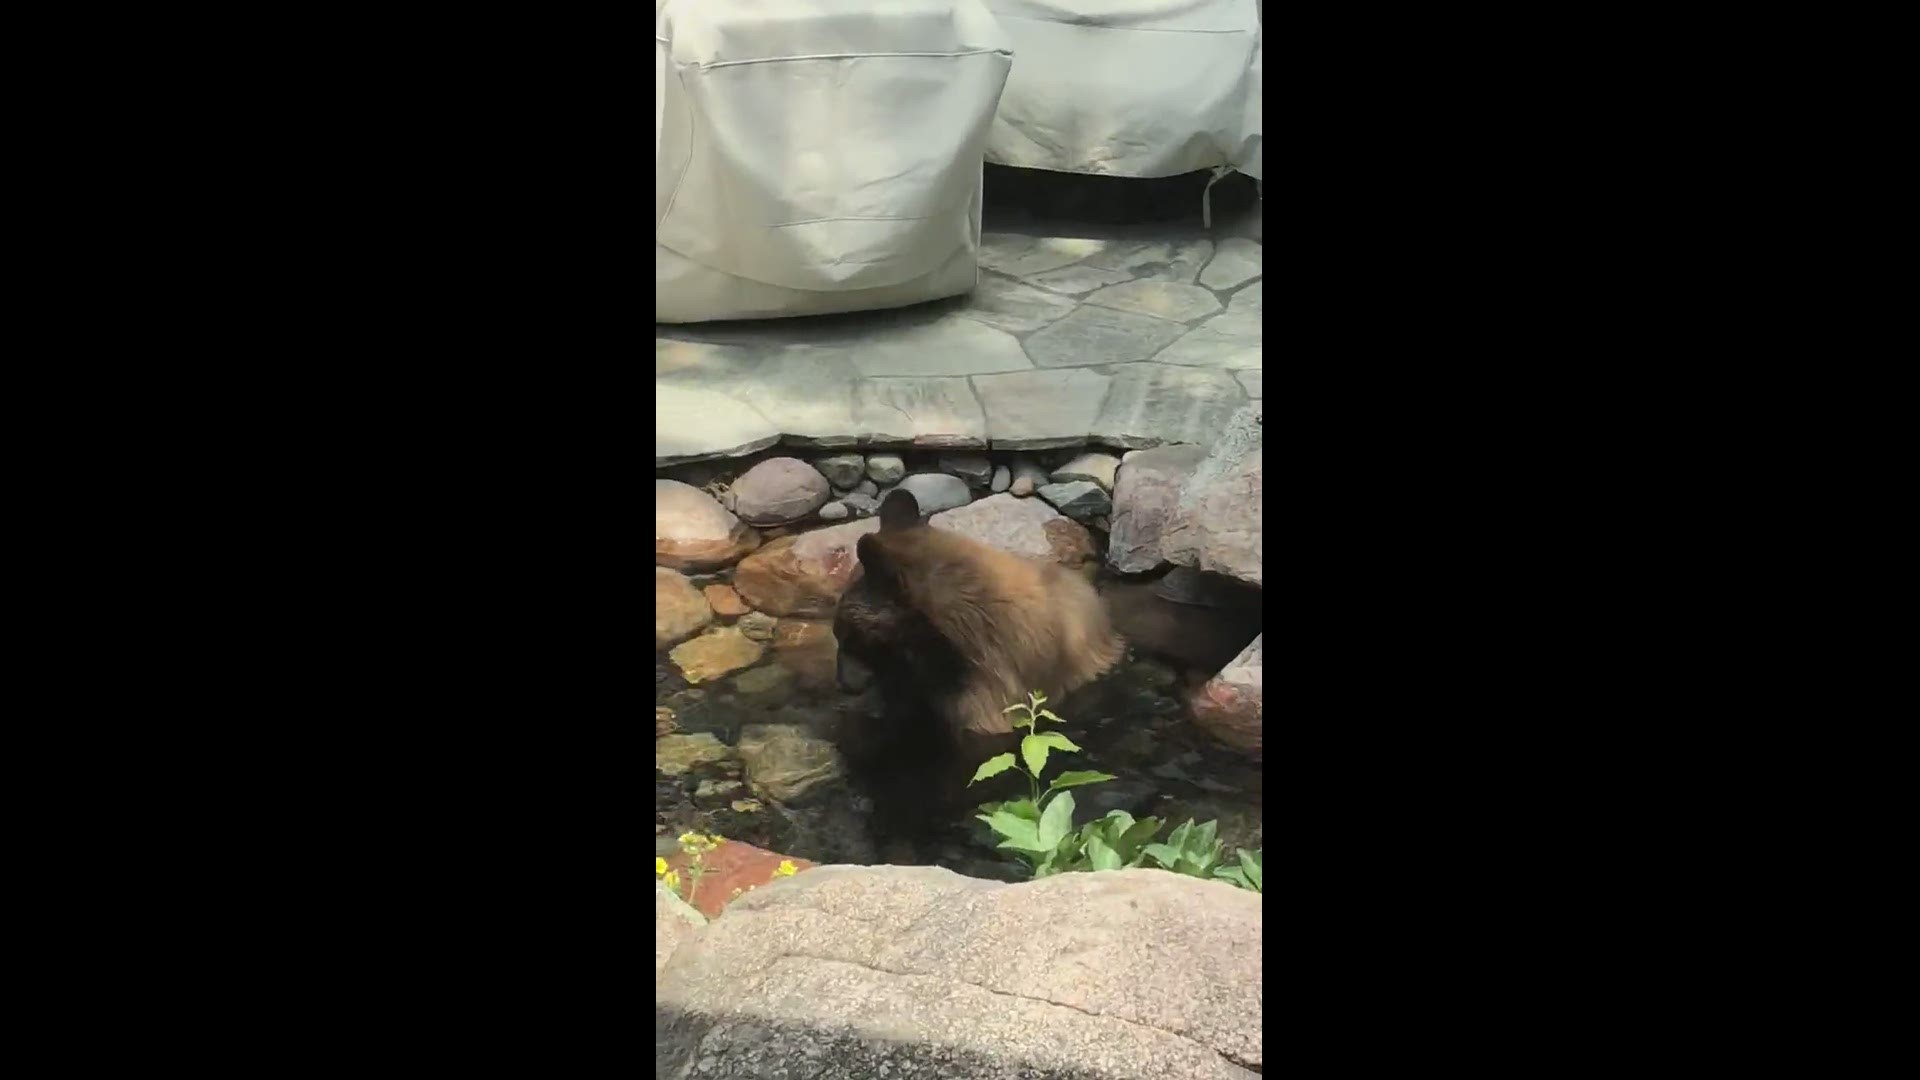 Penny Venn and her husband had a warning from a neighbor that a bear was headed to their Genesee house – they caught up with him taking a dip in their pond.